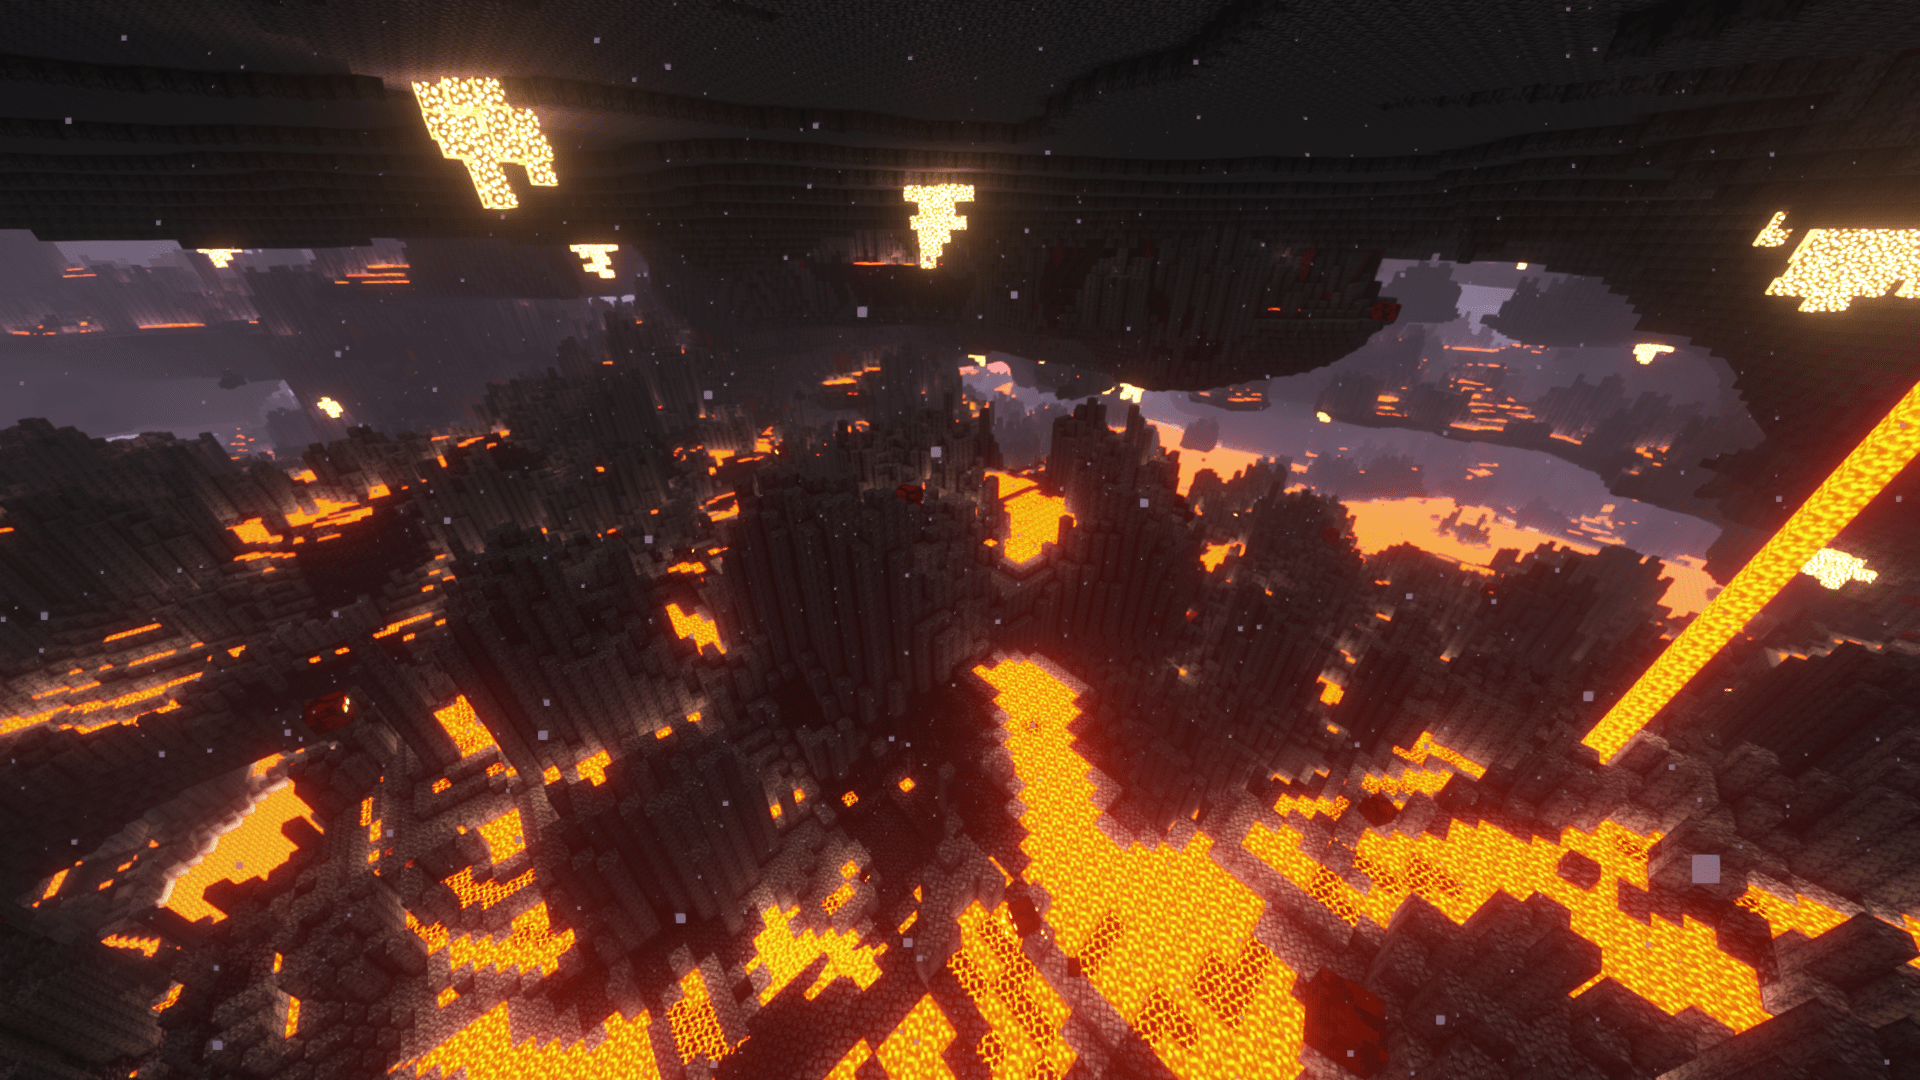 The Minecraft Nether World – What a Challenge!